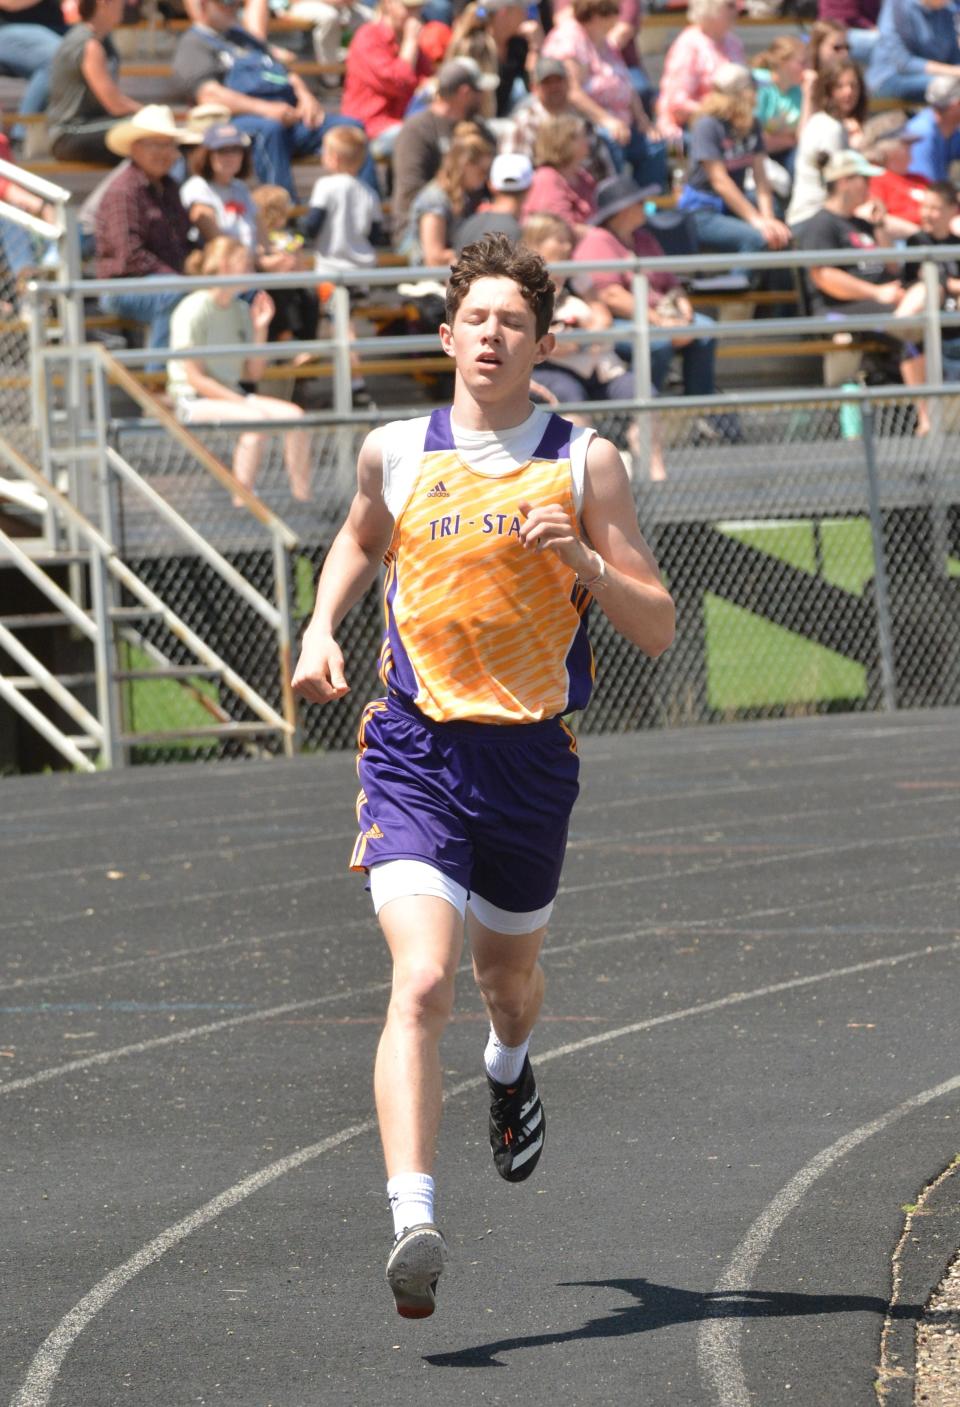 Tri-State's Kaleb Foltz cruised to victory in the boys' 1,600-meter run and also ran on two winning relays Tuesday during the Eastern Coteau Conference track and field meet at Allen Mitchell Field.